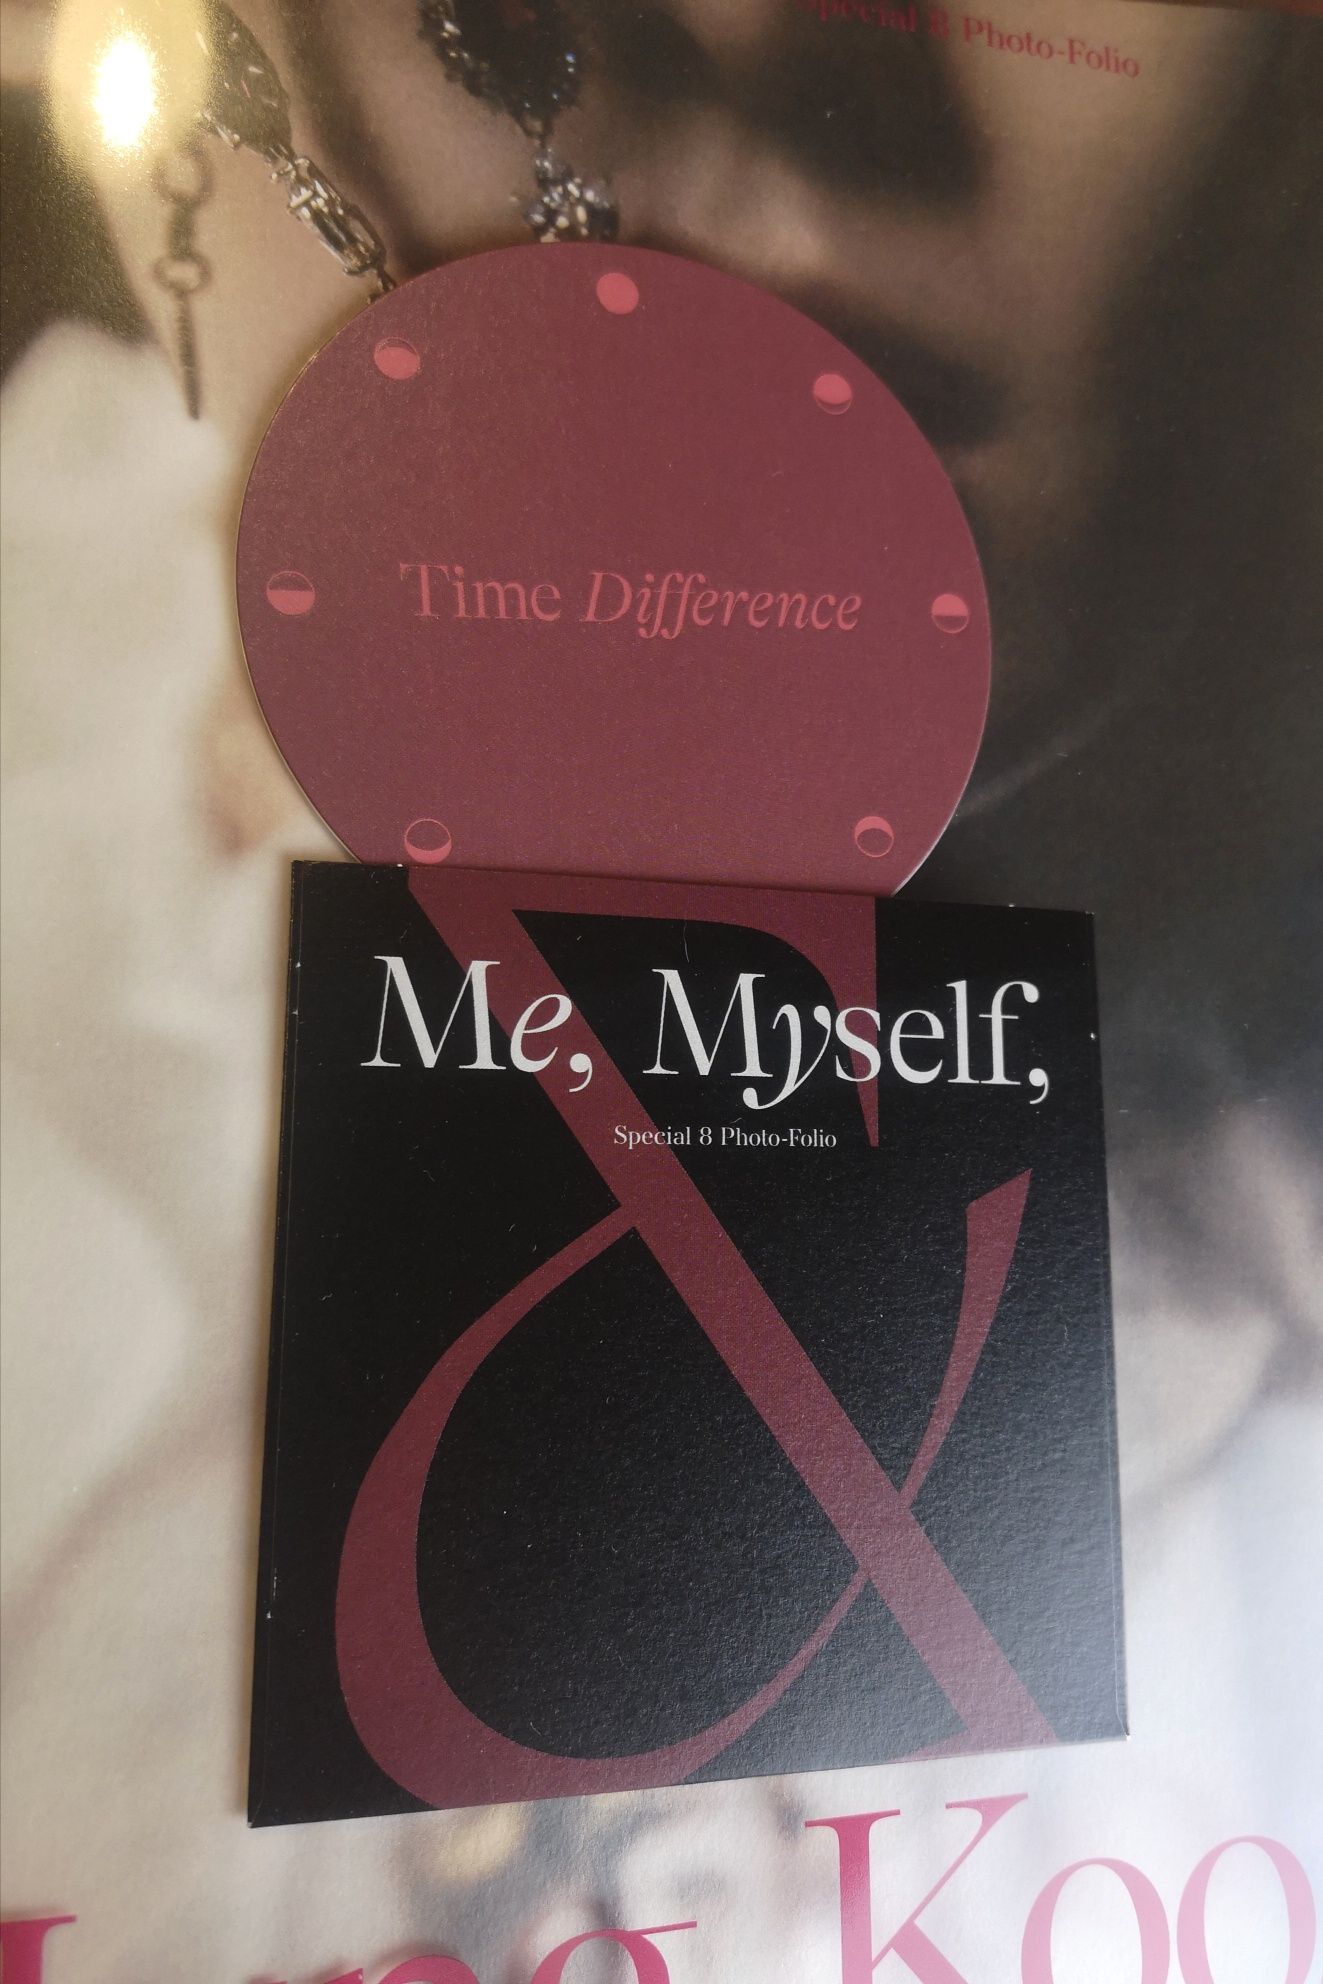 Jungkook photobook me myself & i time difference bts